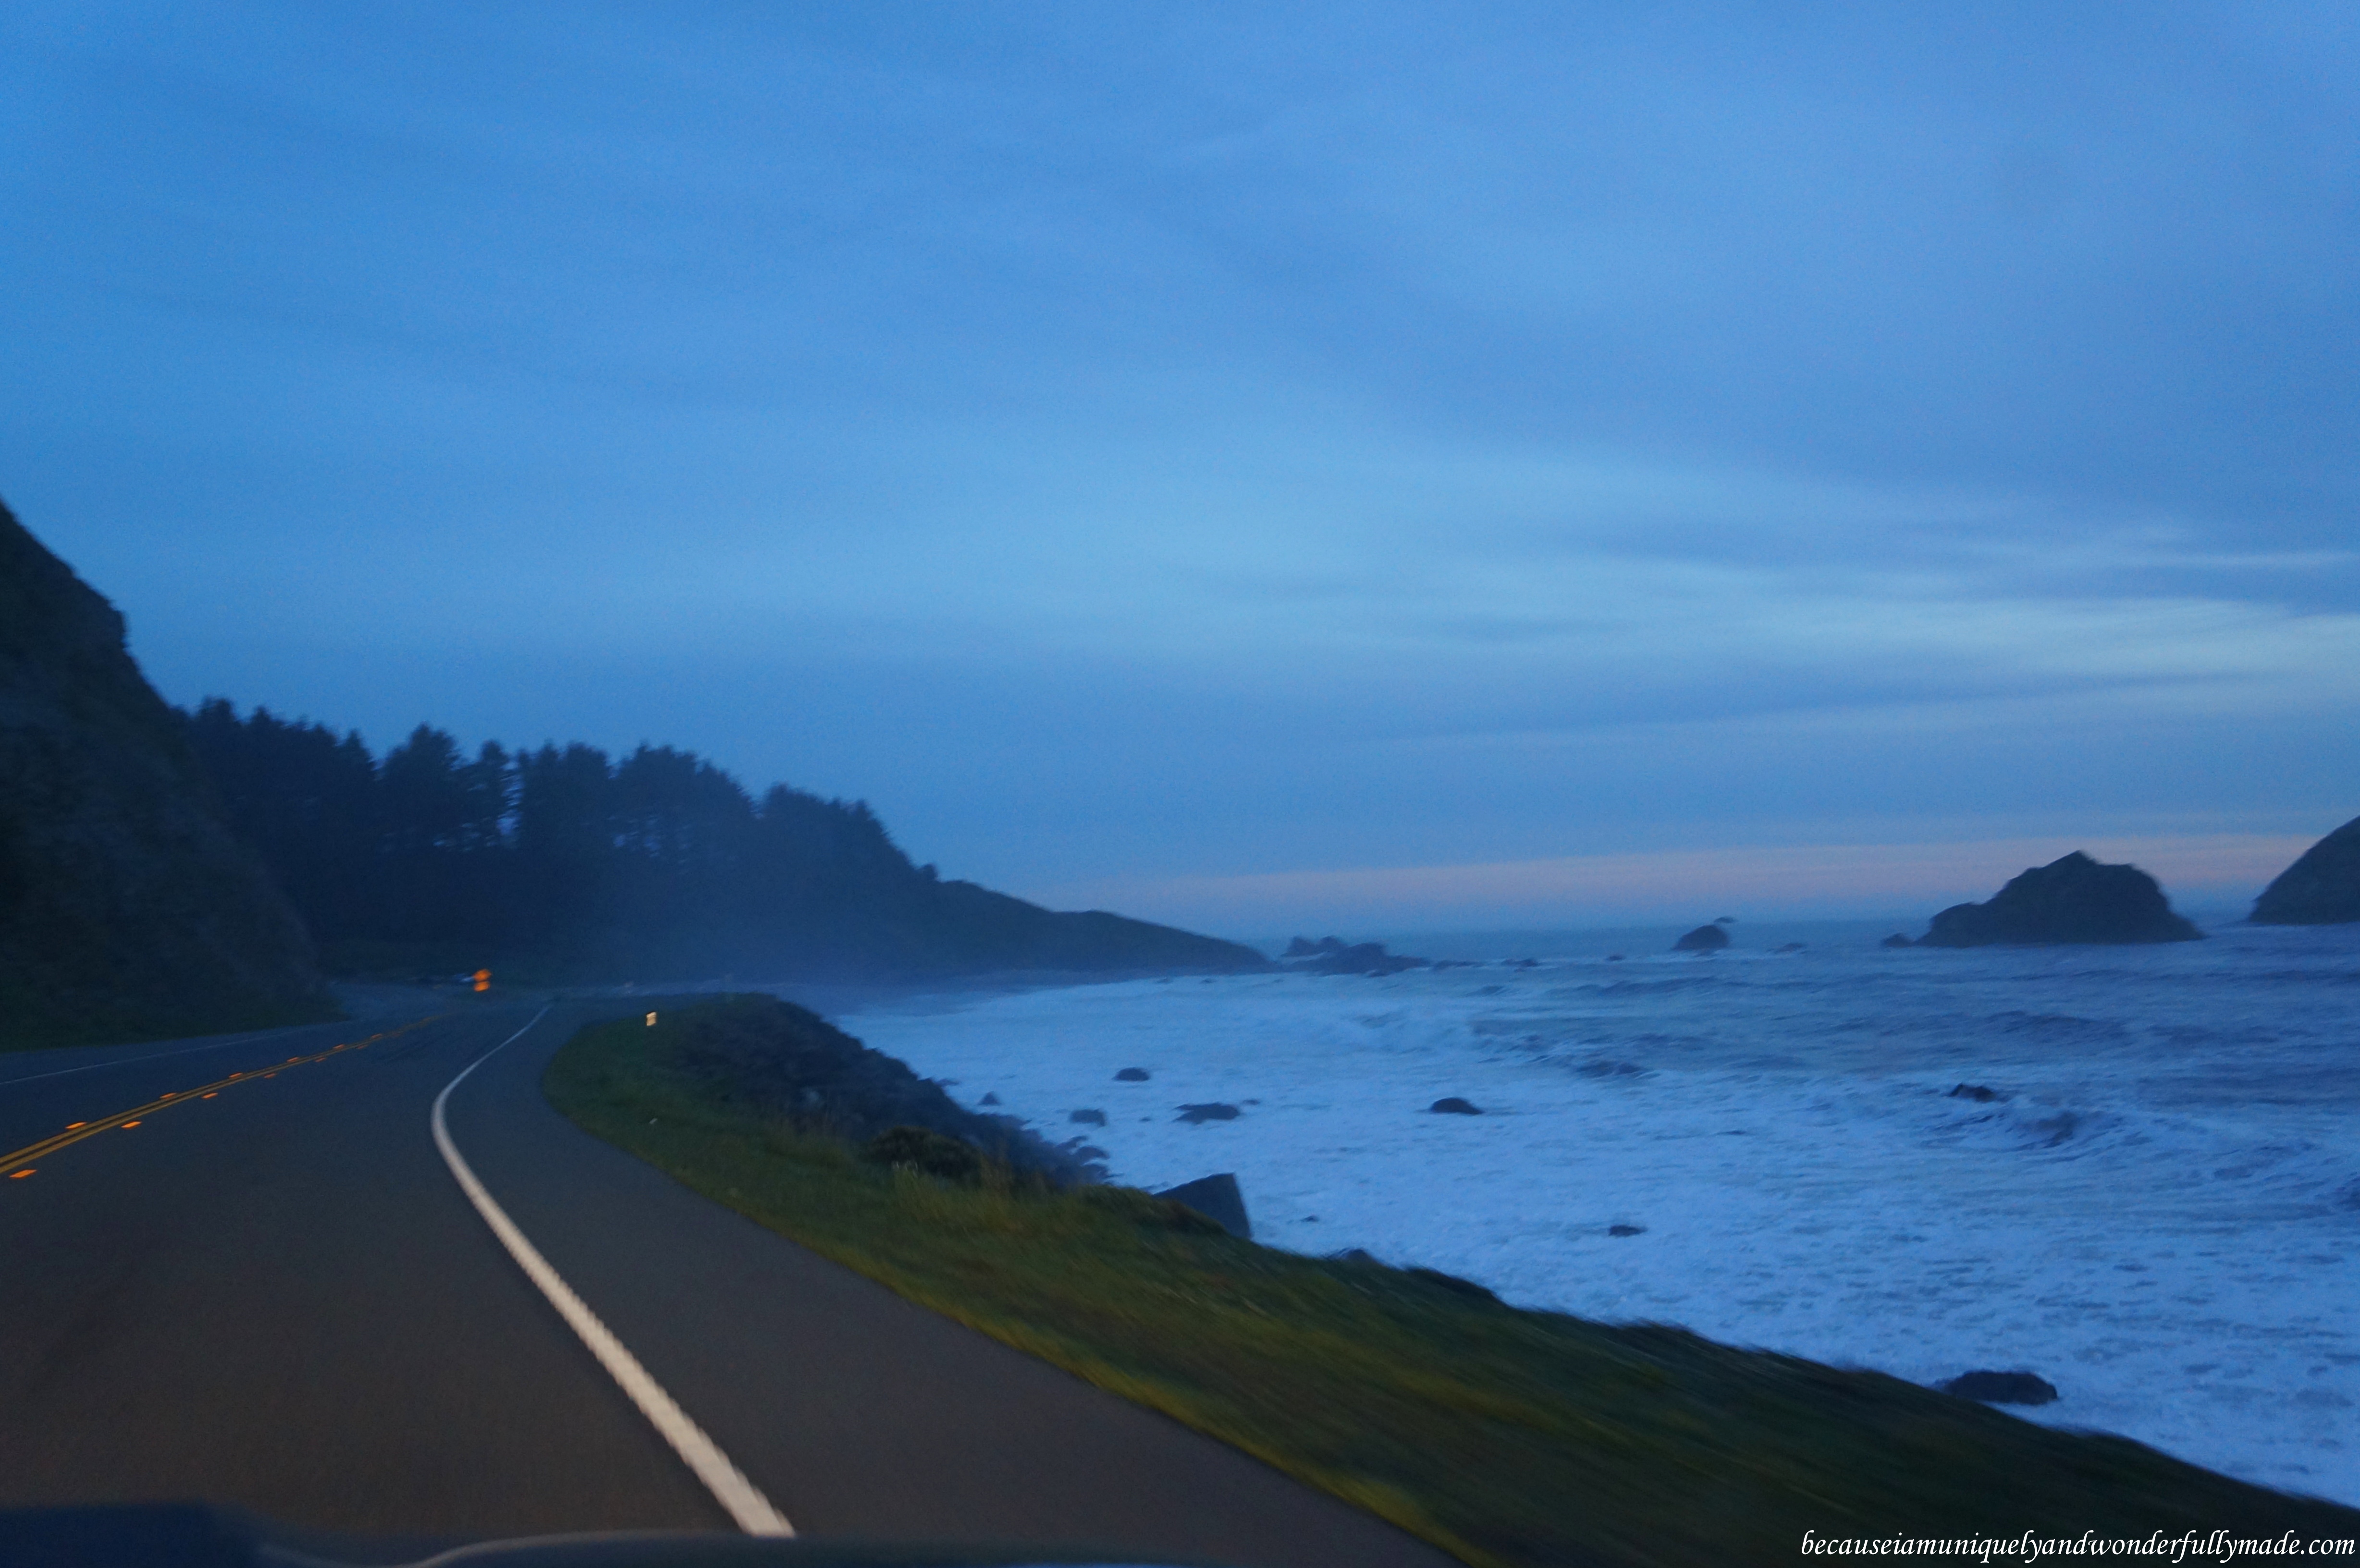 Heading back to our hotel after a long day at Redwood National and State Parks. Highway 101 at dusk is inspiring.